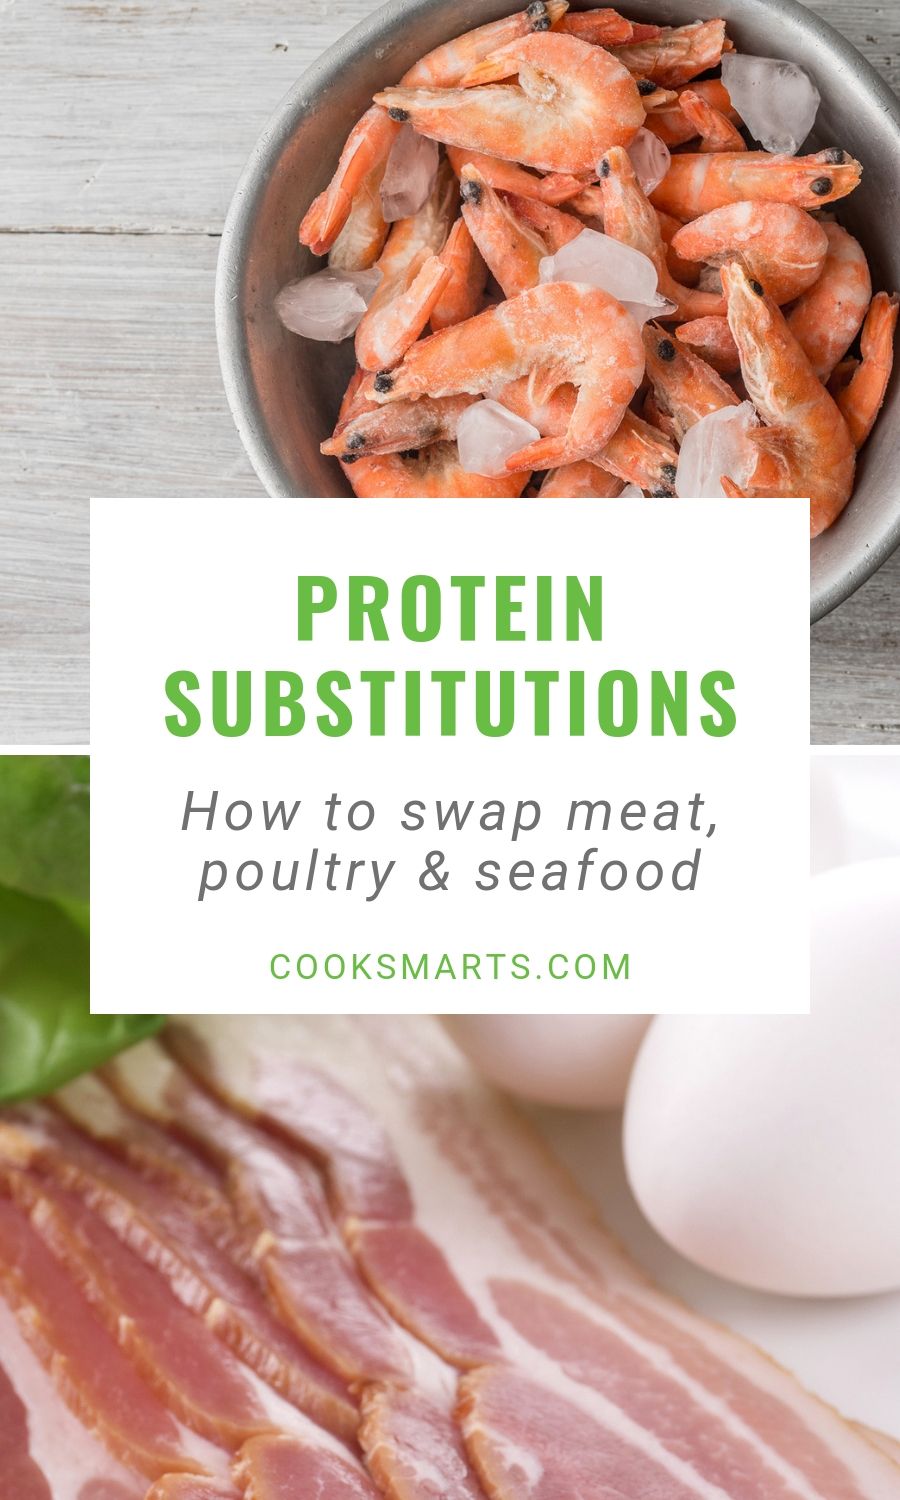 Cooking Substitutions: How to Swap Meat, Poultry, & Seafood | Cook Smarts